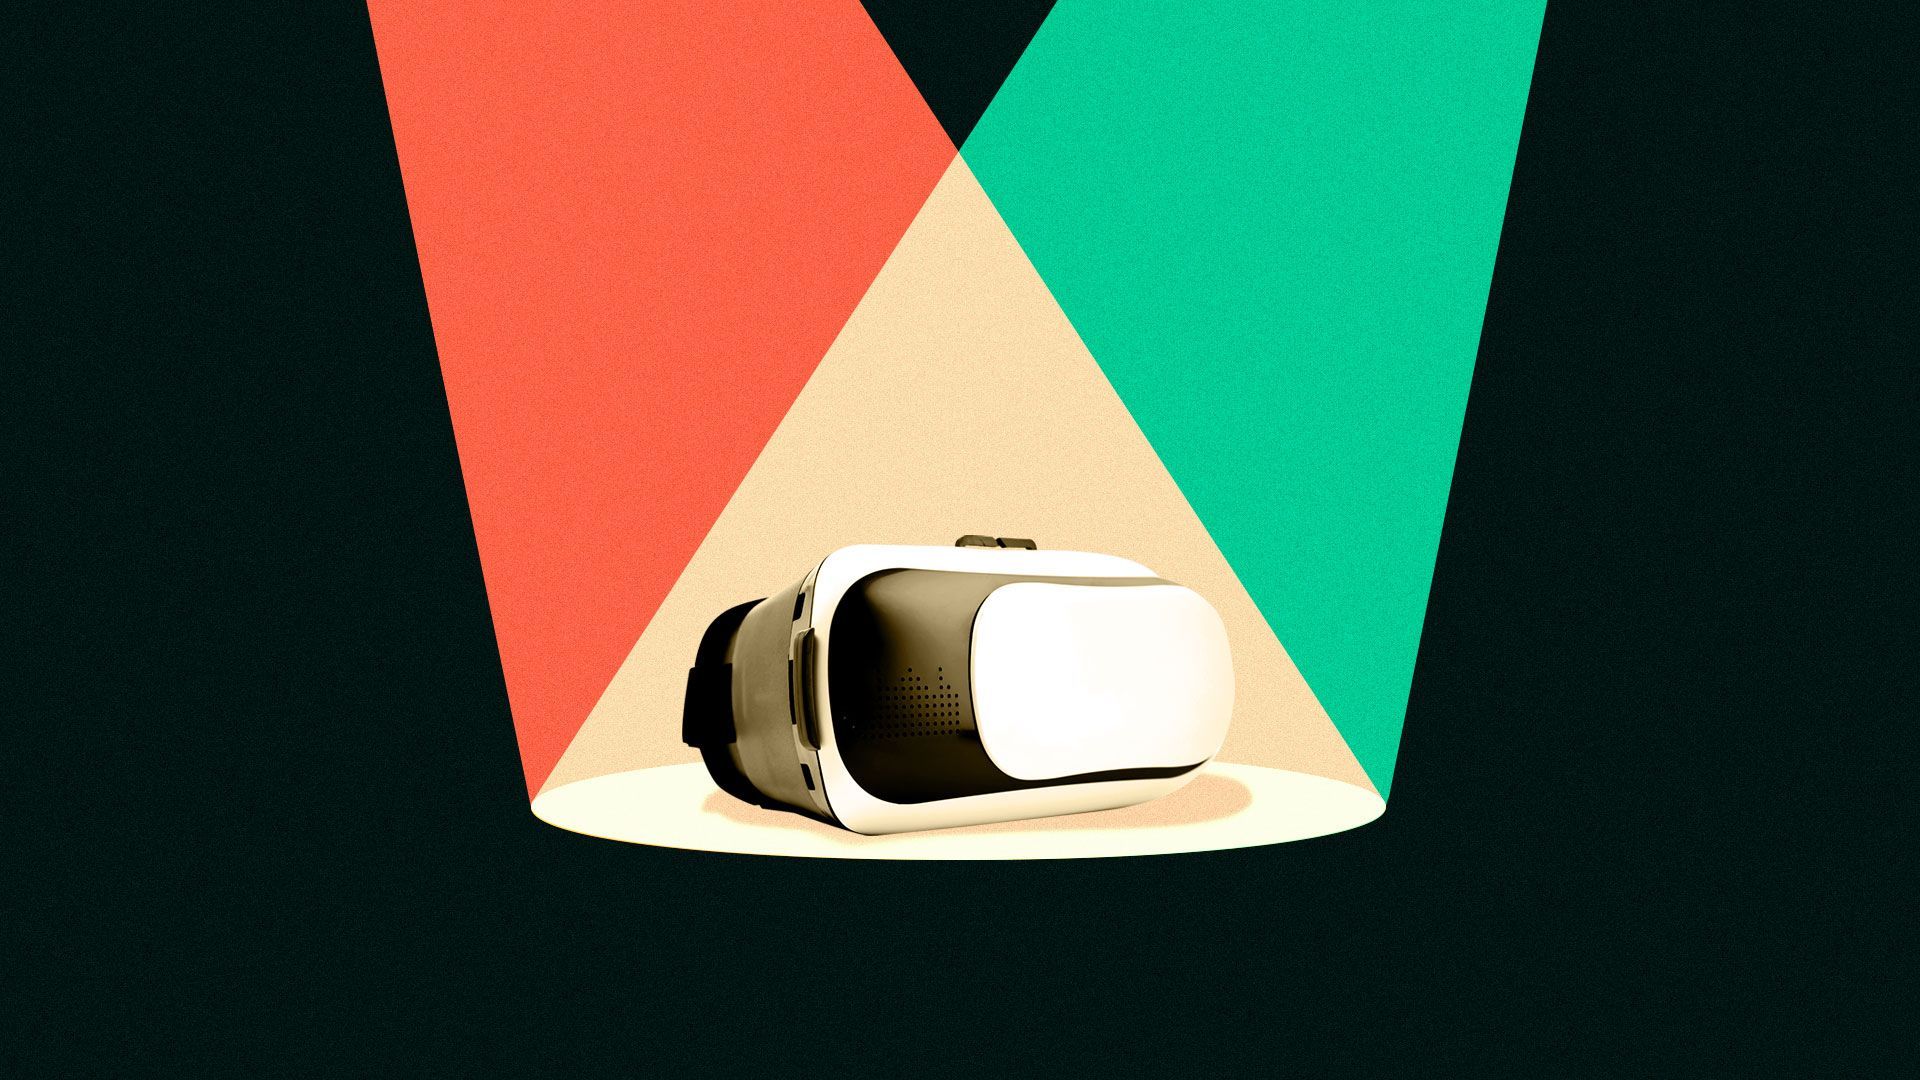 Illustration of virtual reality (VR) headset in the spotlight